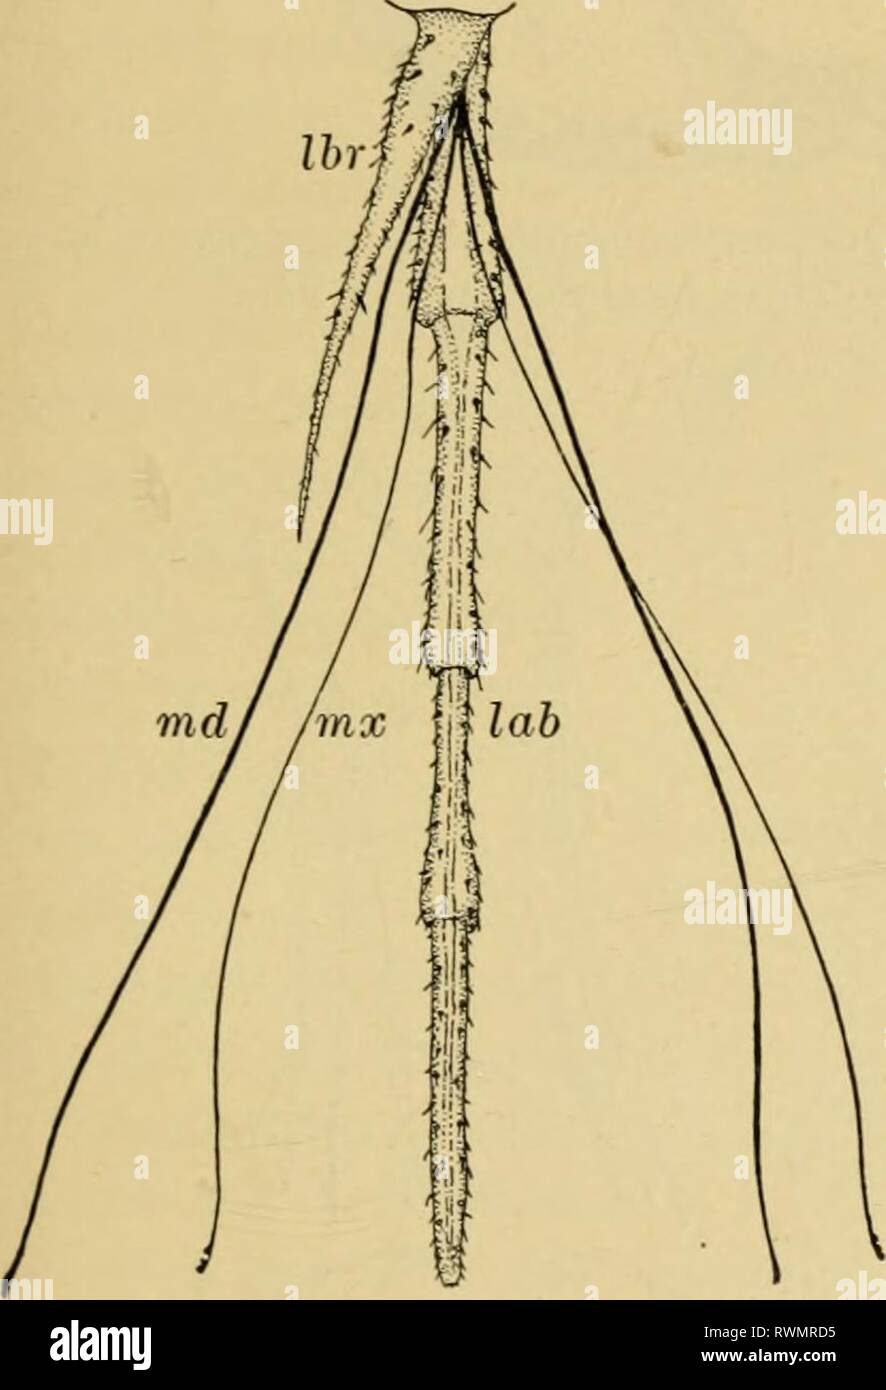 Elementary entomology (1912) Elementary entomology elementaryentom00sand Year: 1912  ANATOMY OF INSECTS — EXTERNAL 15 termed the scccvid inaxillcs. The labium forms the floor of the mouth and assists the mandibles and maxillae with the food. It is hinged to the head at its base (by the inaitum), and projecting from either side is a palpus, similar in form and function to the maxillary palpi. Between the palpi are one or two pairs of lobes, the ligjila. Projecting into the cavity of the mouth from the inner sur- face of the labium is the hypophaijnx, or tongue. This in the    Fig. 15. Mouth-par Stock Photo